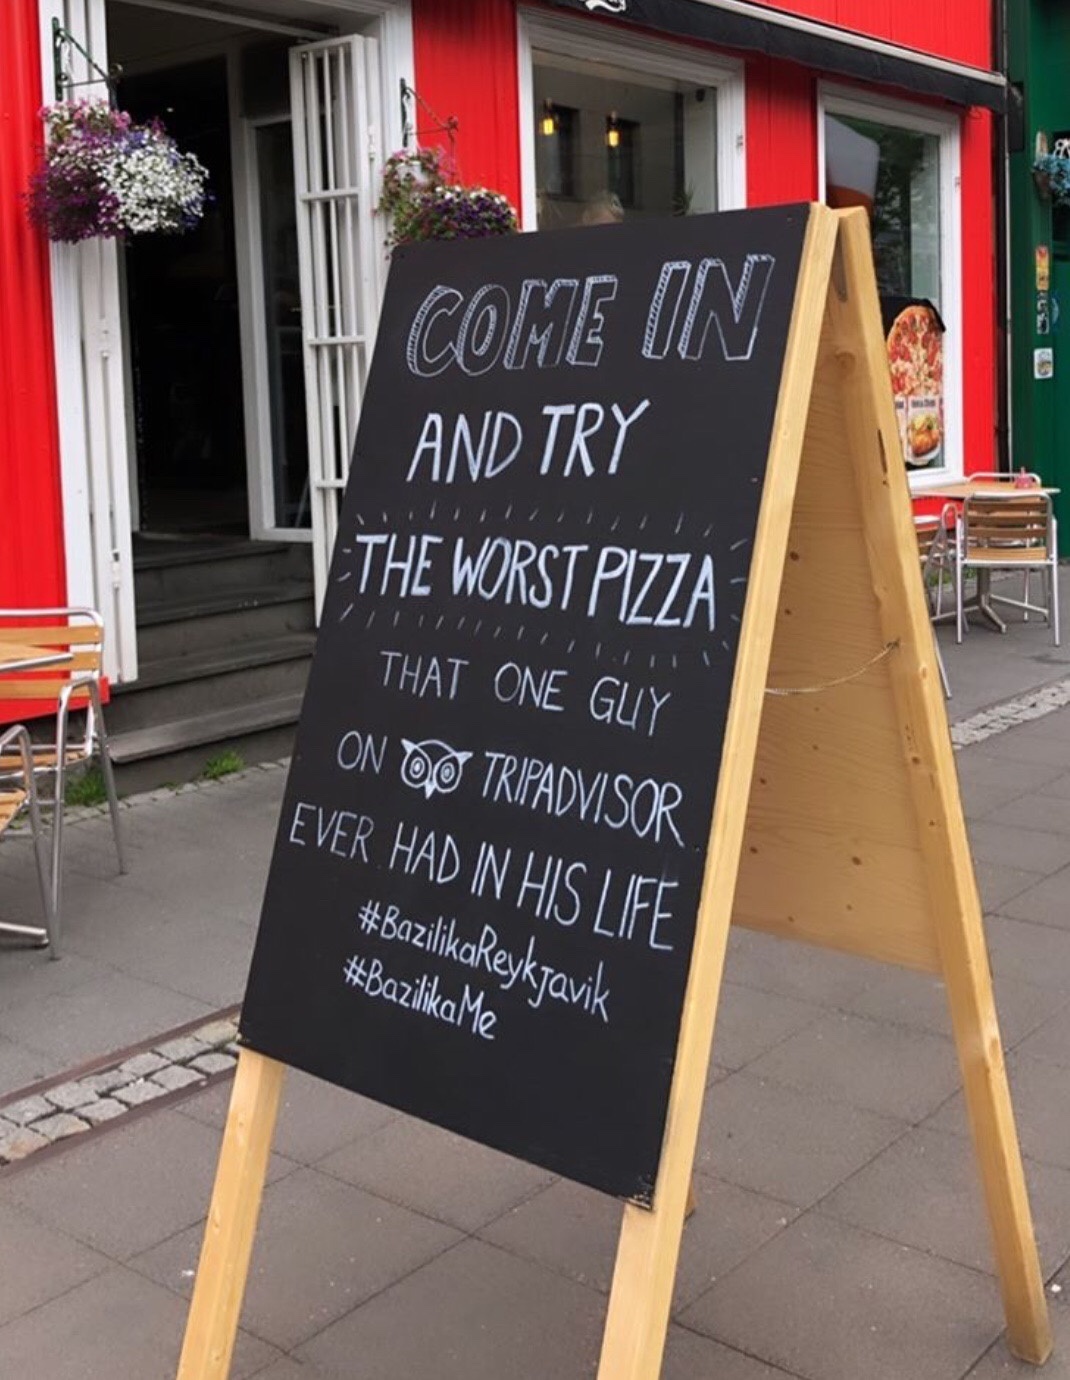 A restaurant sign with "Come in and try the worst pizza that one guy on Tripadvisor ever had in his life" copy